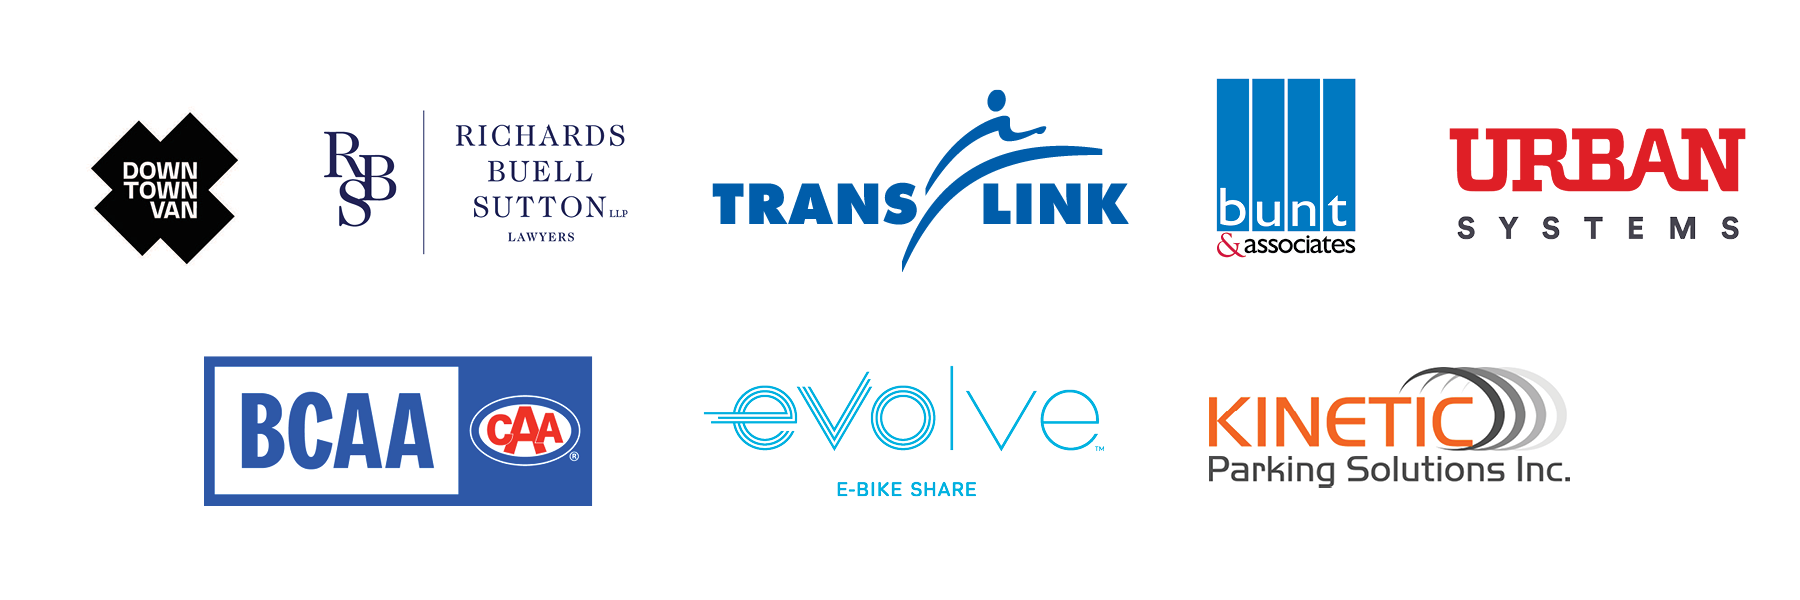 A slurry of logos including TransLink, Downtown Vancouver, Richards Buell Sutton, bunt & associates, BCAA, evolve, Kinetic Parking Solutions Inc., and Urban Systems.